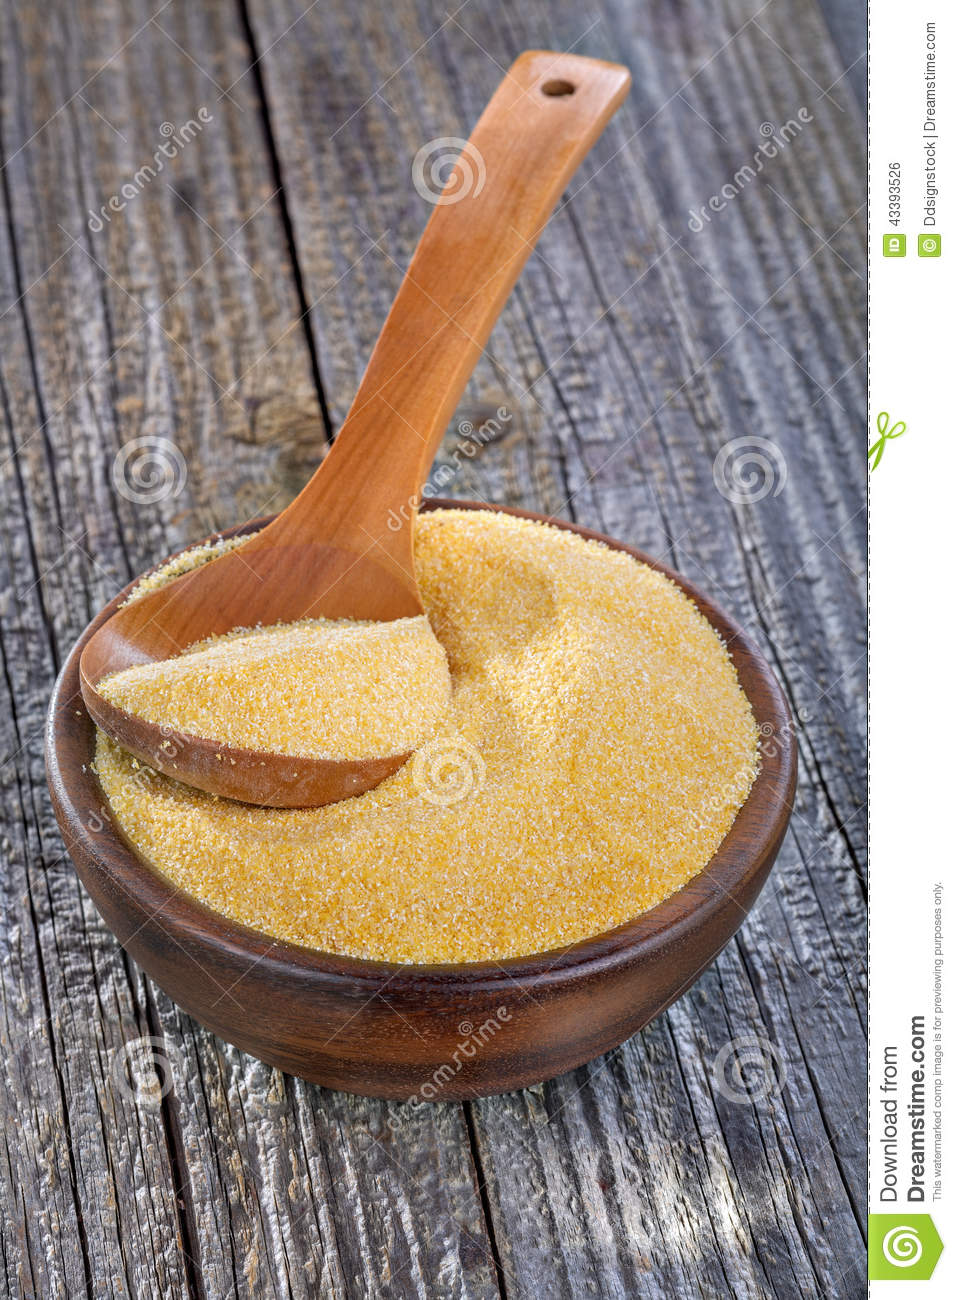 Corn Grits Polenta In A Wooden Bowl On Old Wooden Table